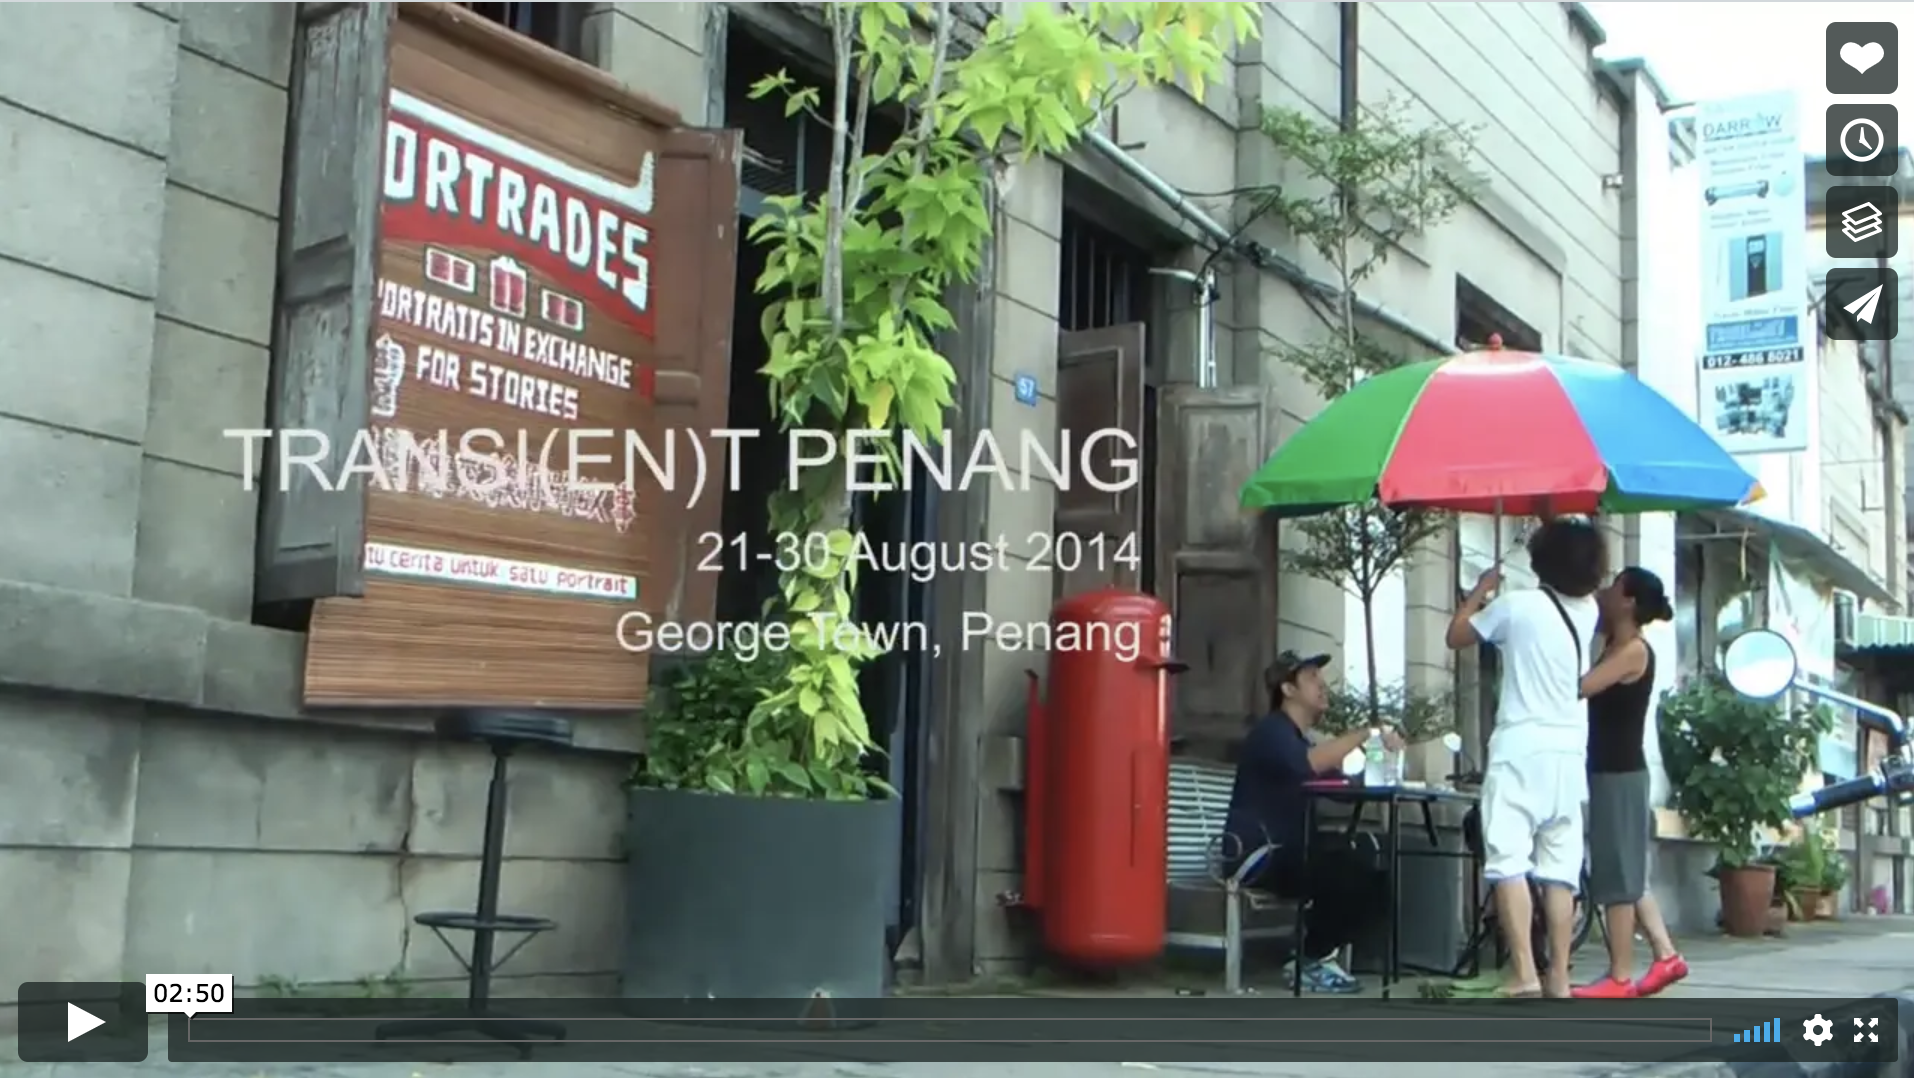 Documentary of Transi(en)t Penang, Glocal Project